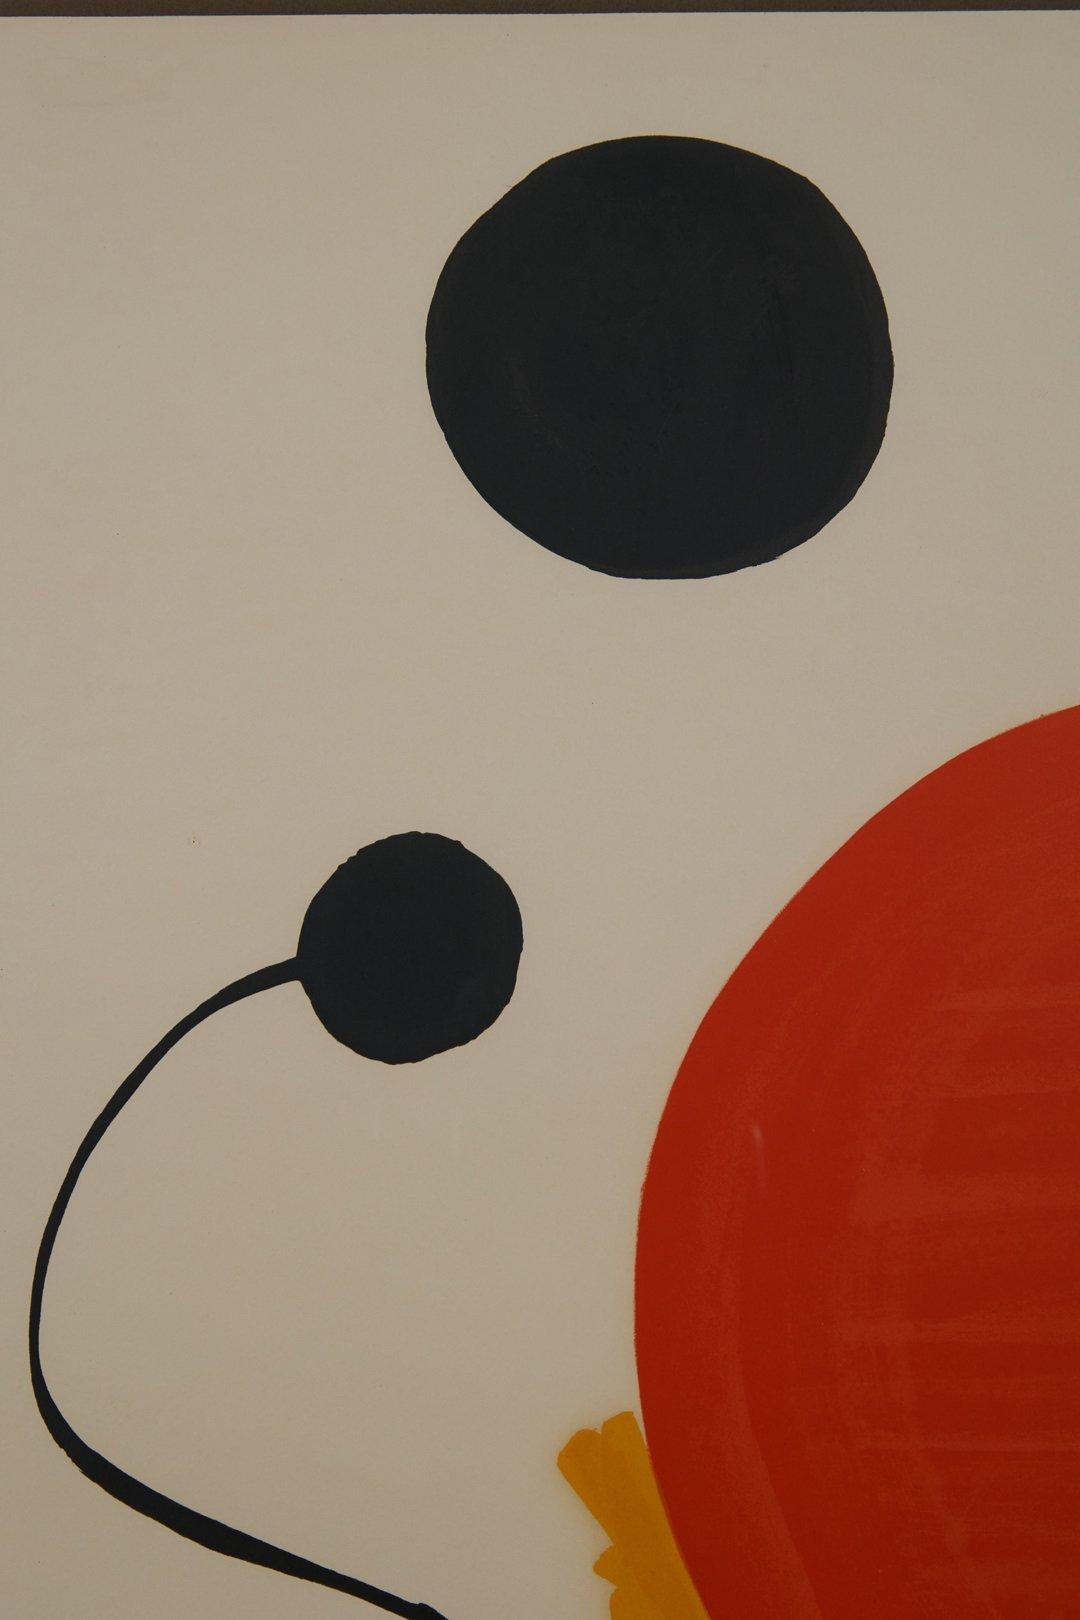 Alexander Calder (American, 1898-1976)
Red Sphere on Yellow Ground, c. 1970
Lithograph in colors
Edition: 74/150
22 x 30 inches
37.5 x 29.5 inches, framed

One of America's best known sculptors, 'Sandy' Calder became most famous for his kinetic